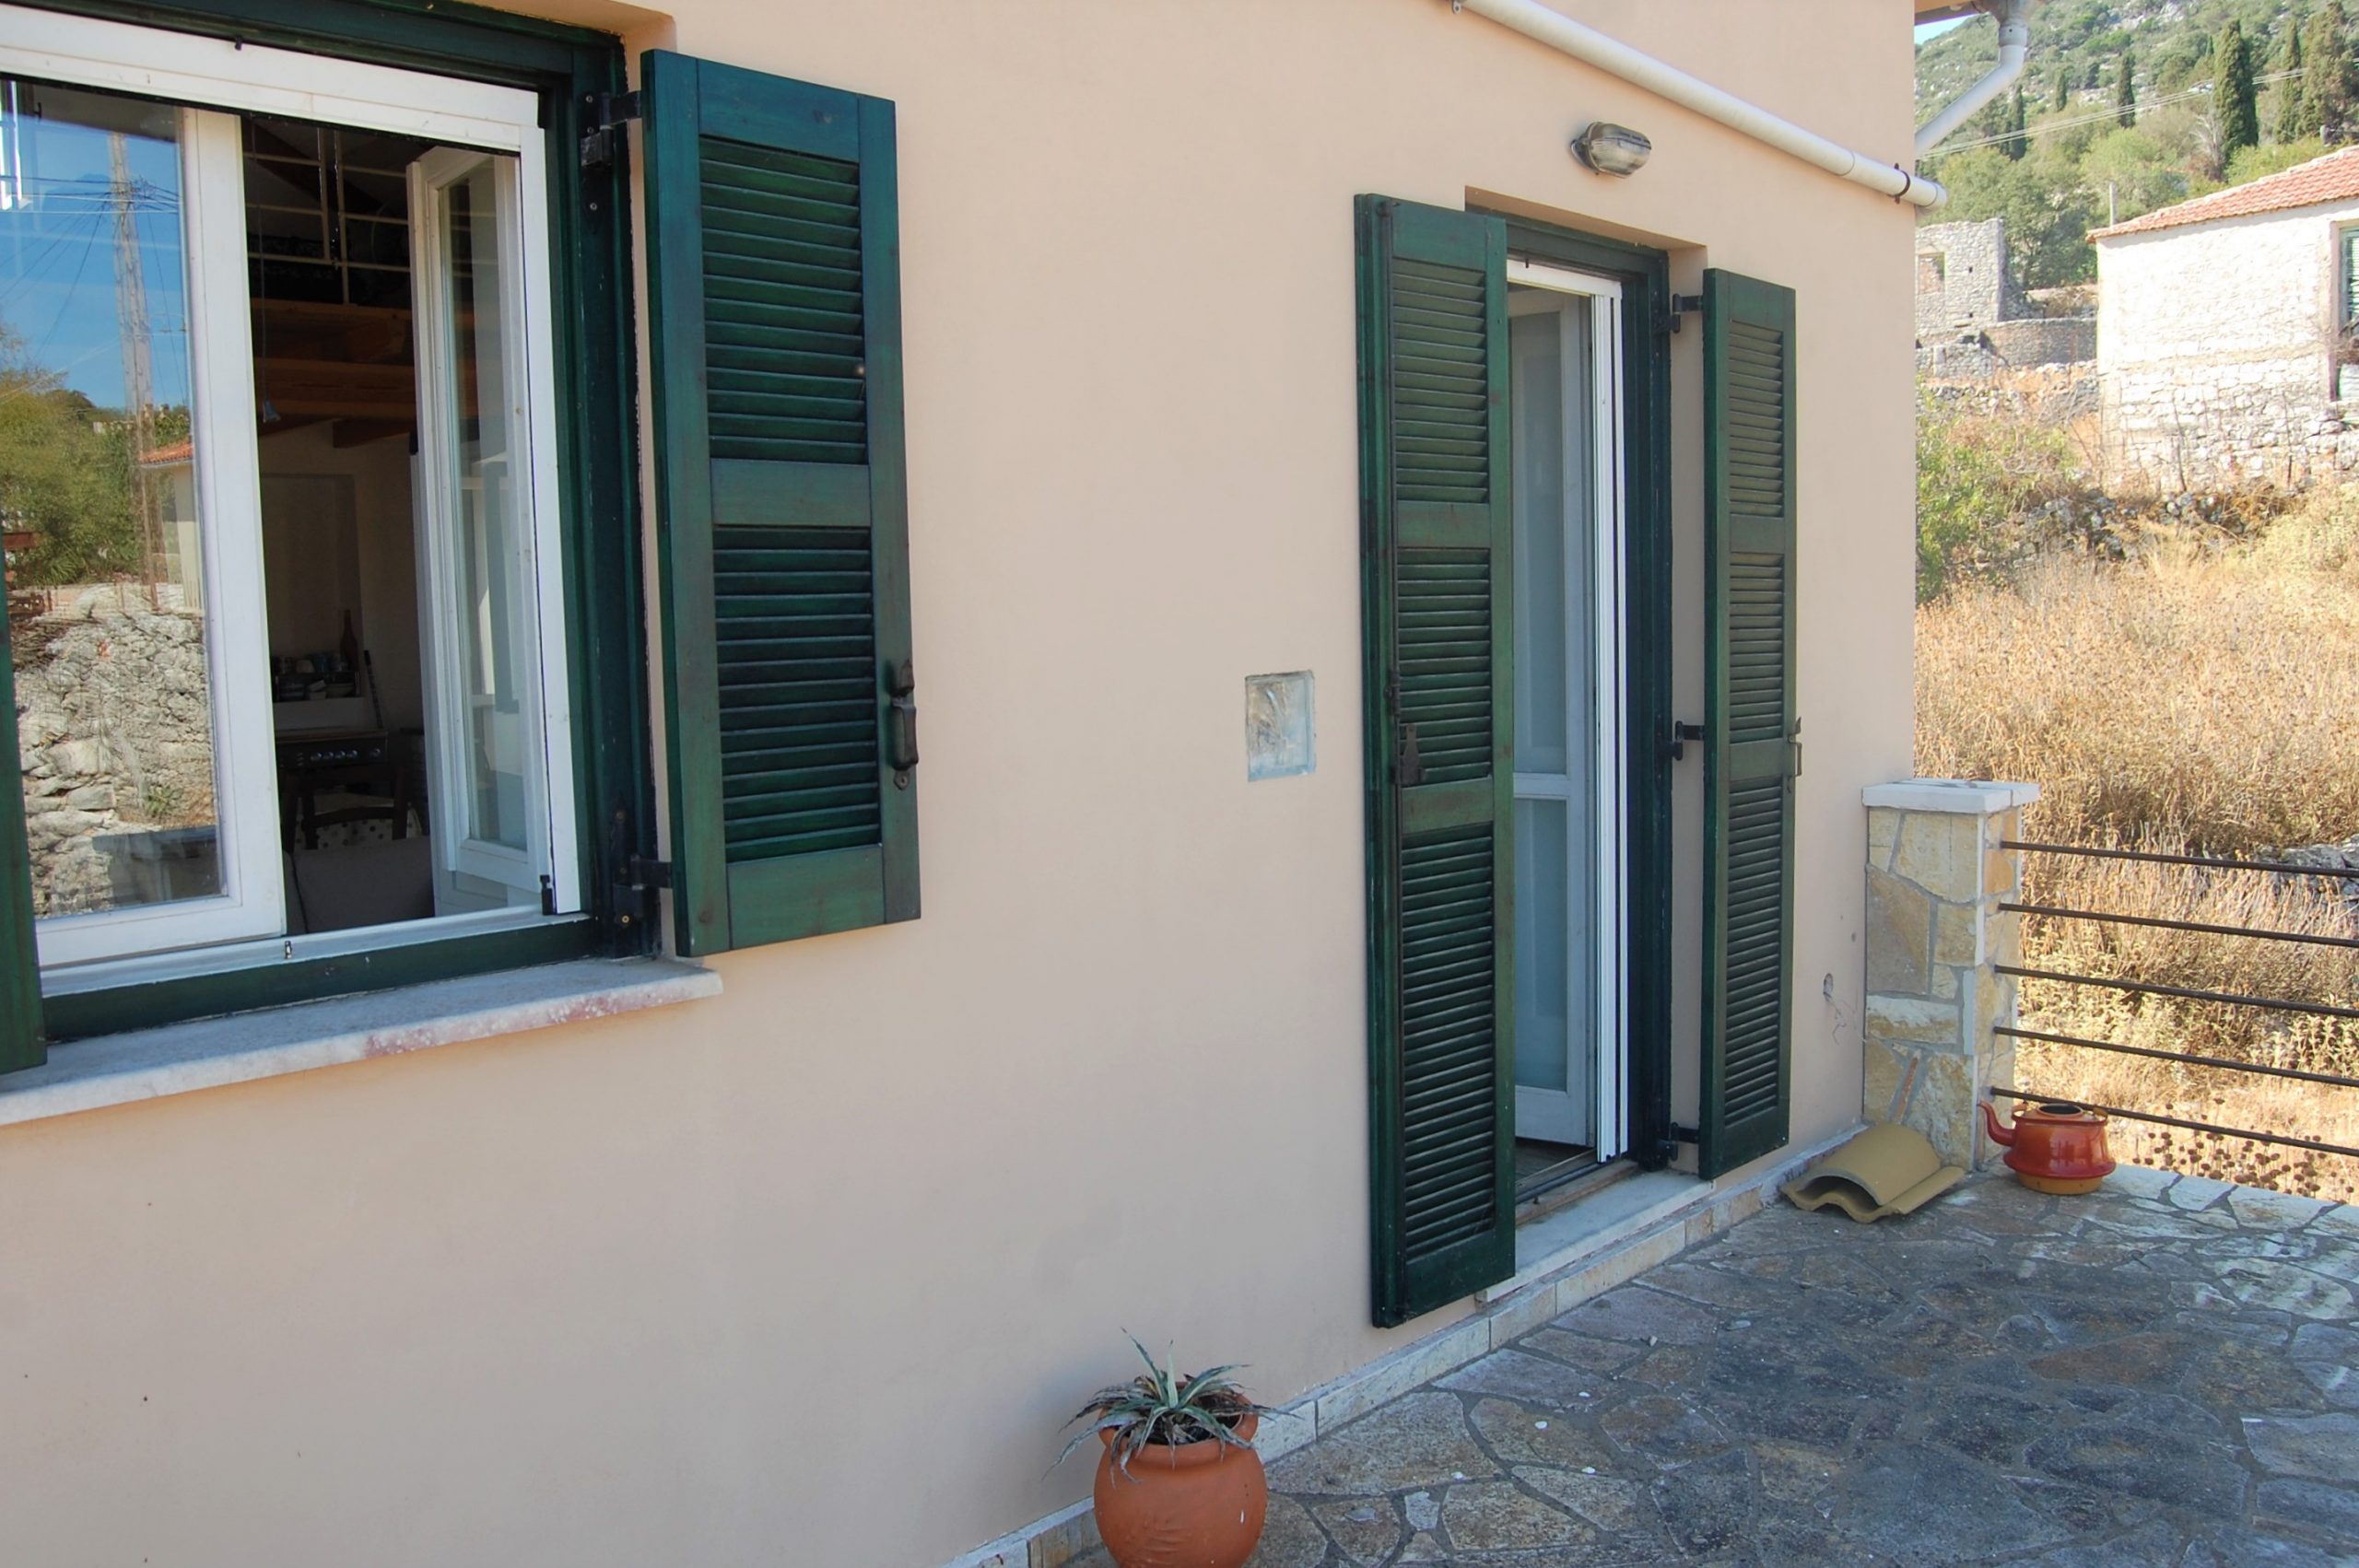 Outdoor area of house for sale Ithaca Greece, Anoghi